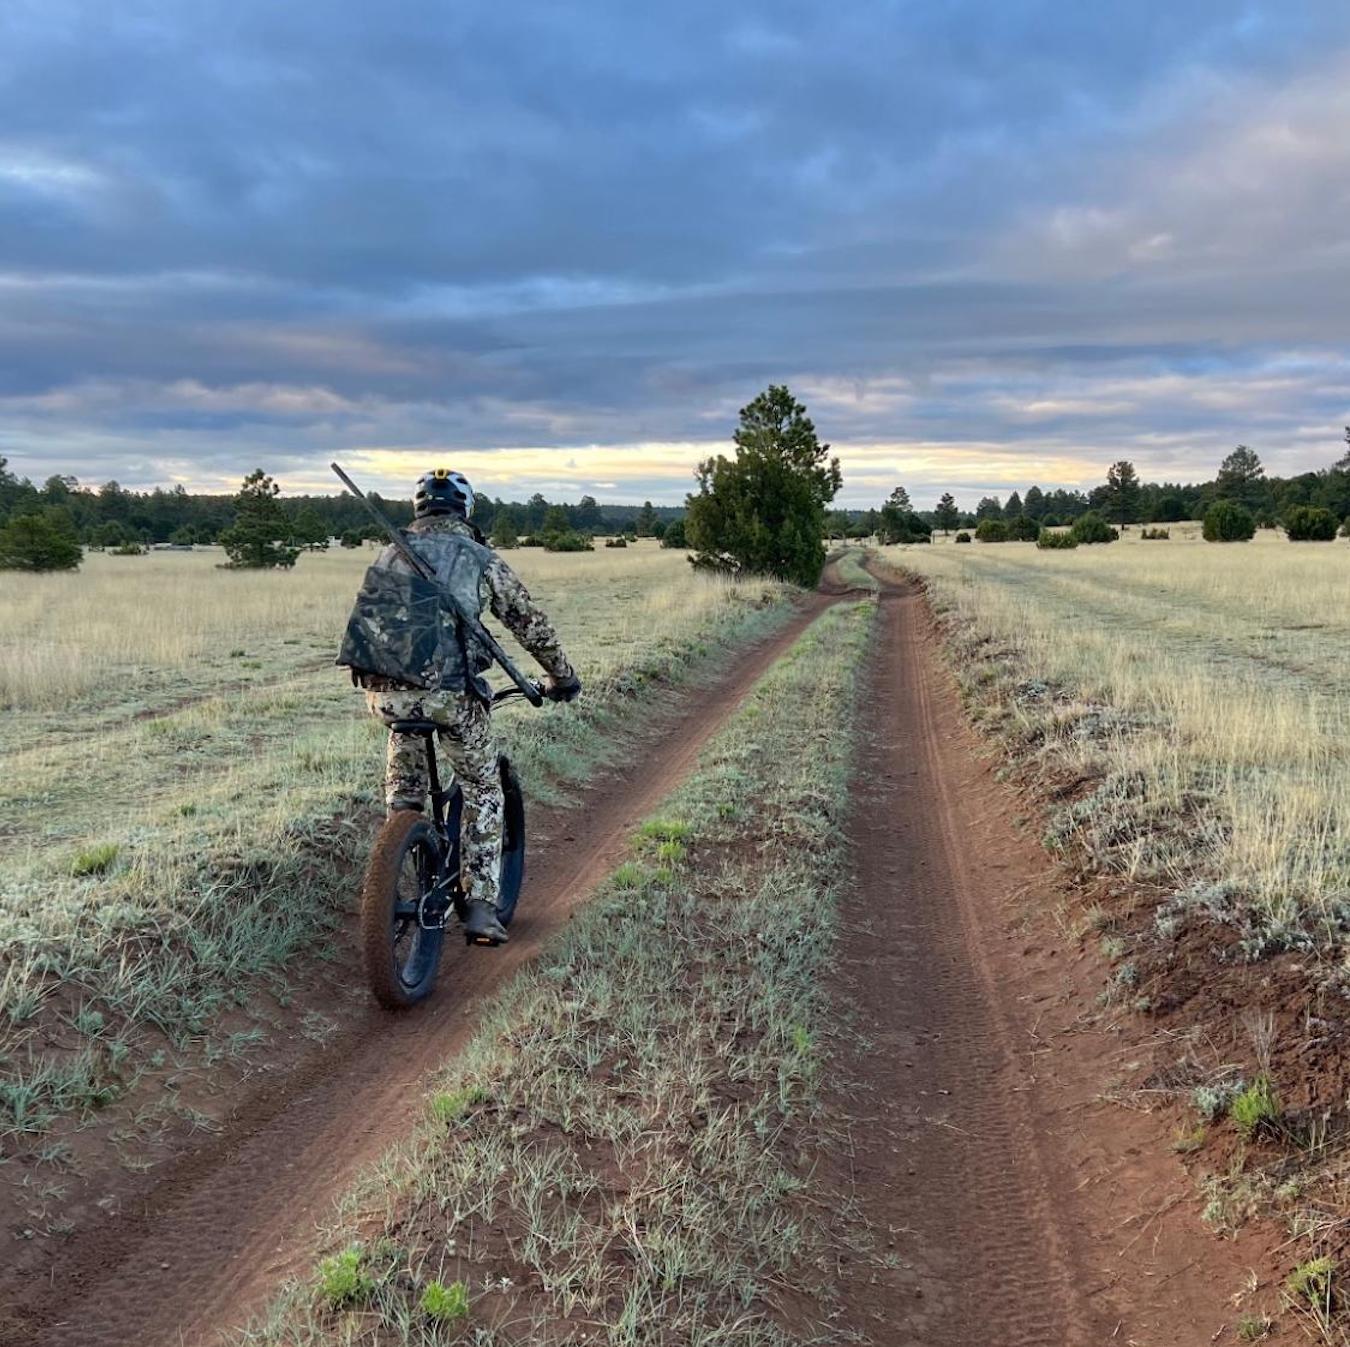 5 E-Bikes for Hunting: Review